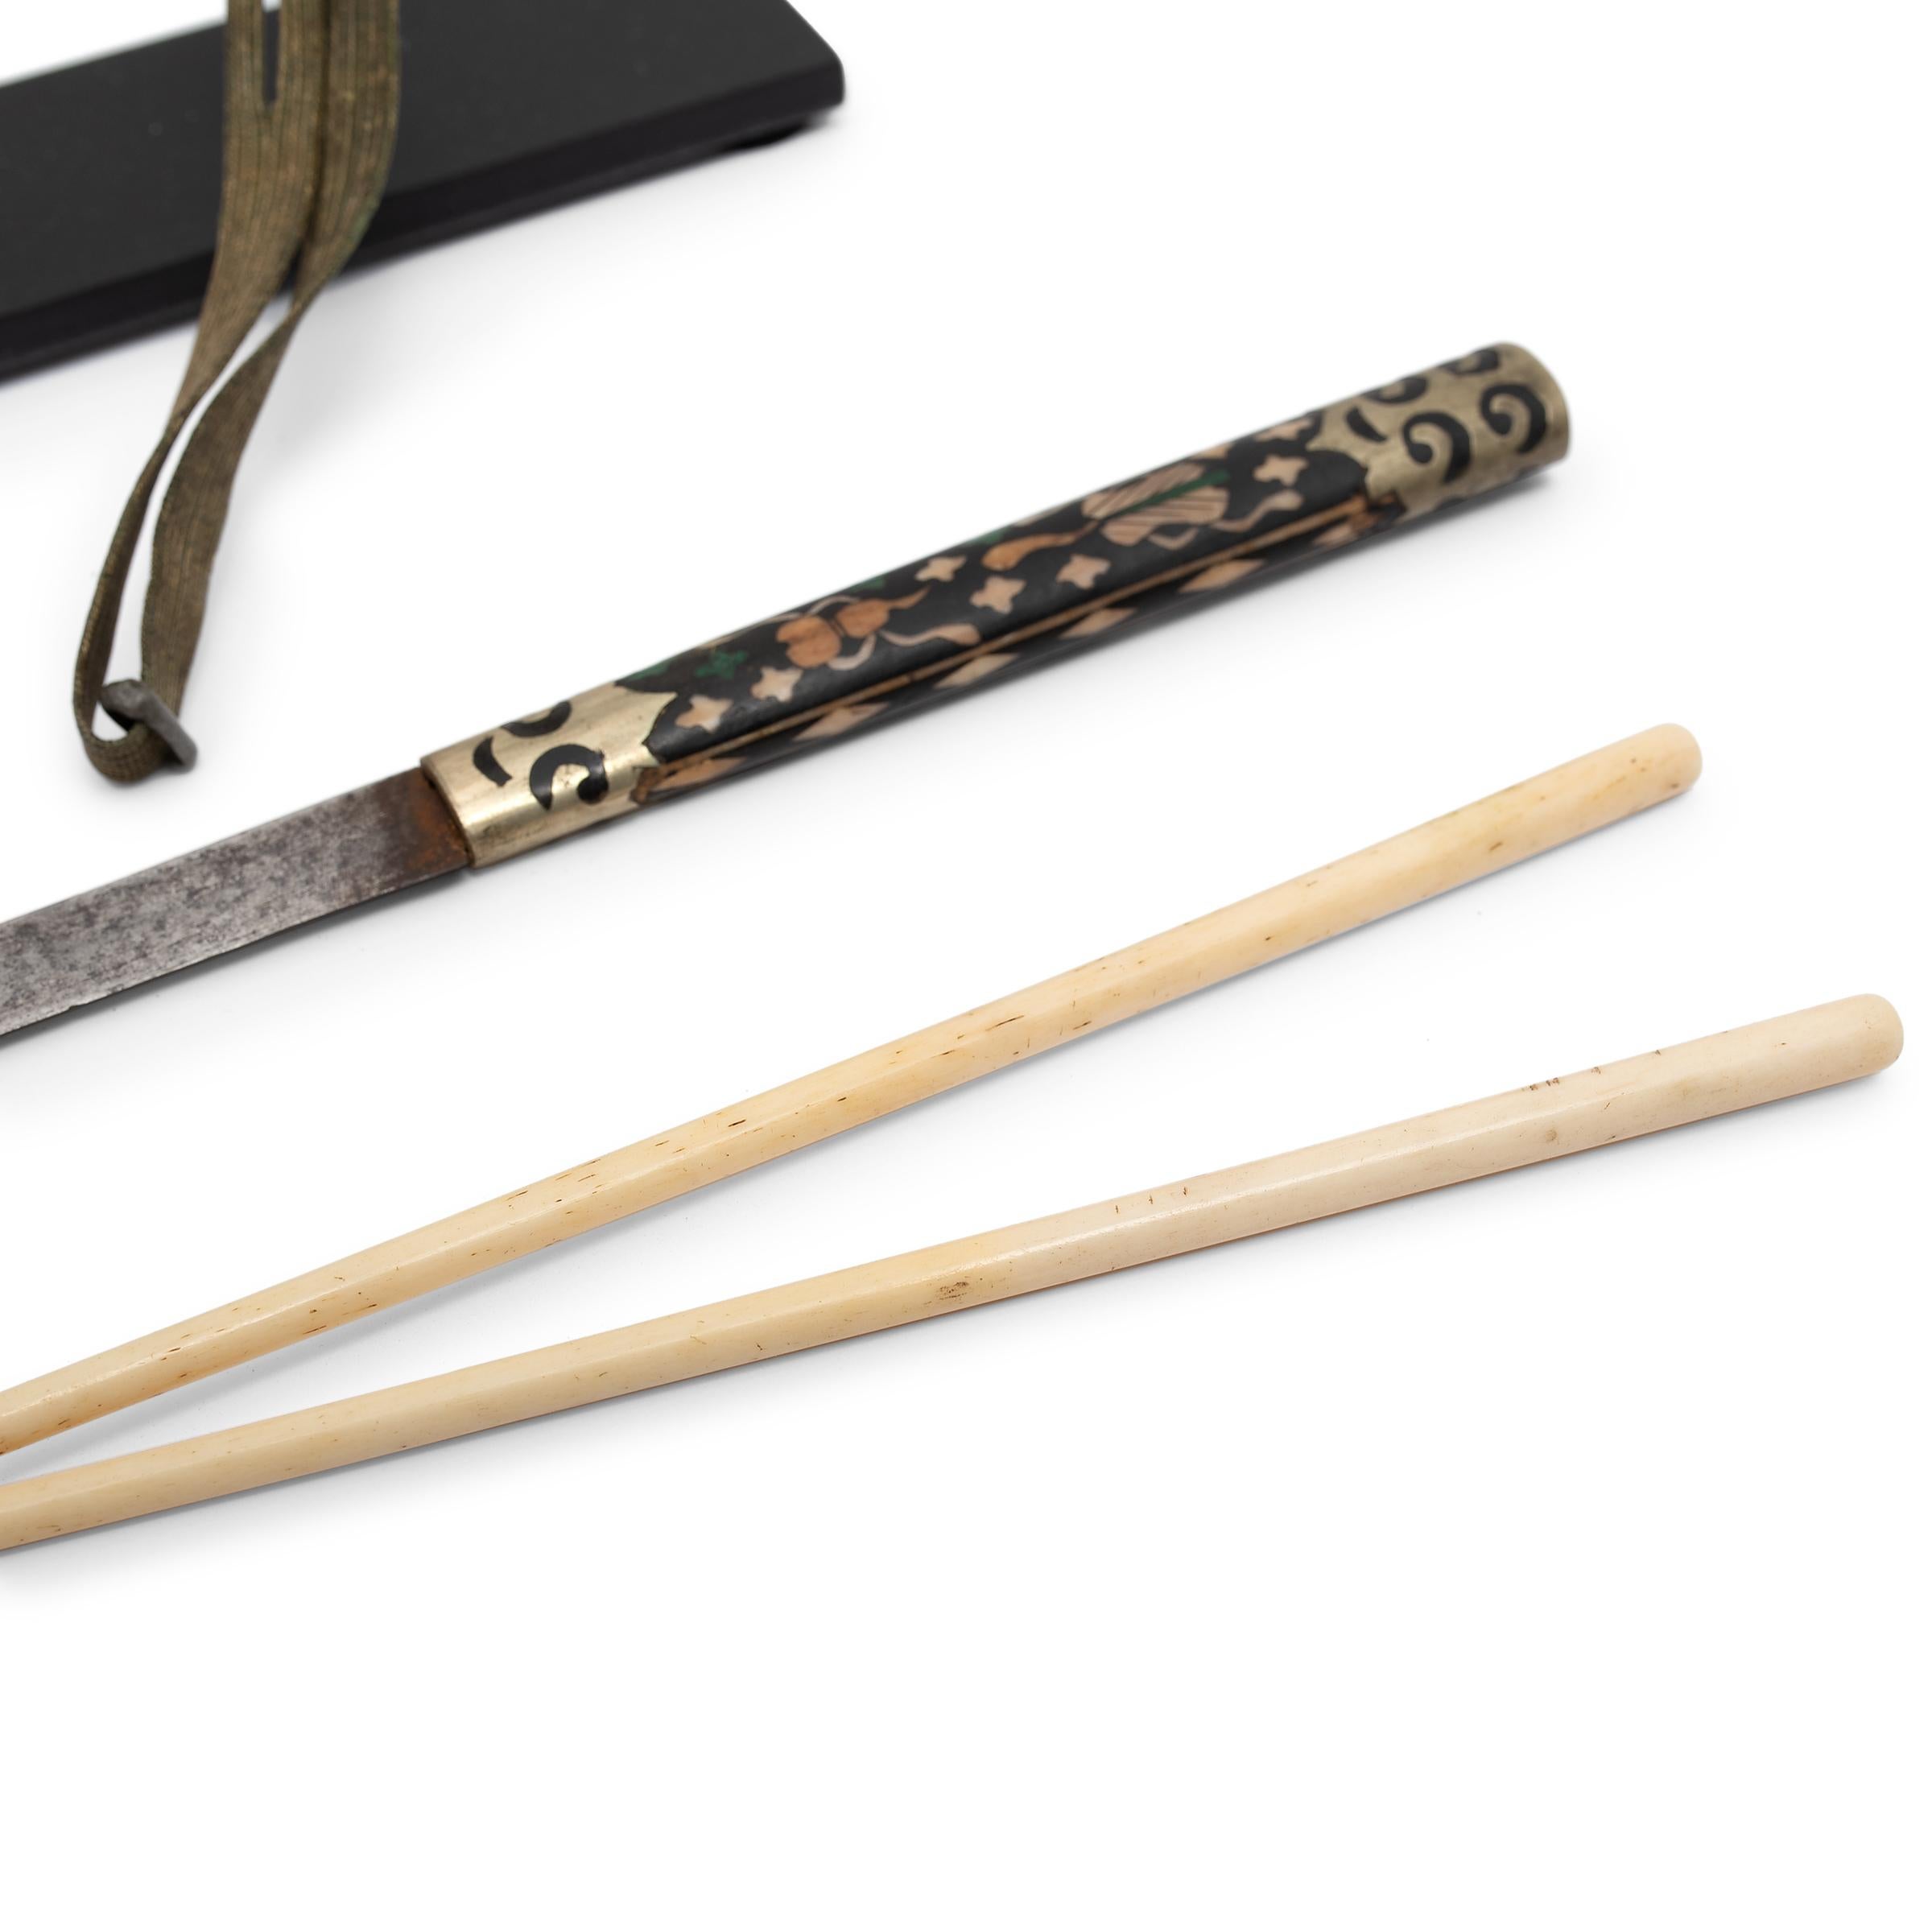 Brass Chinese Traveling Knife and Chopstick Set with Bone Inlay, c. 1850